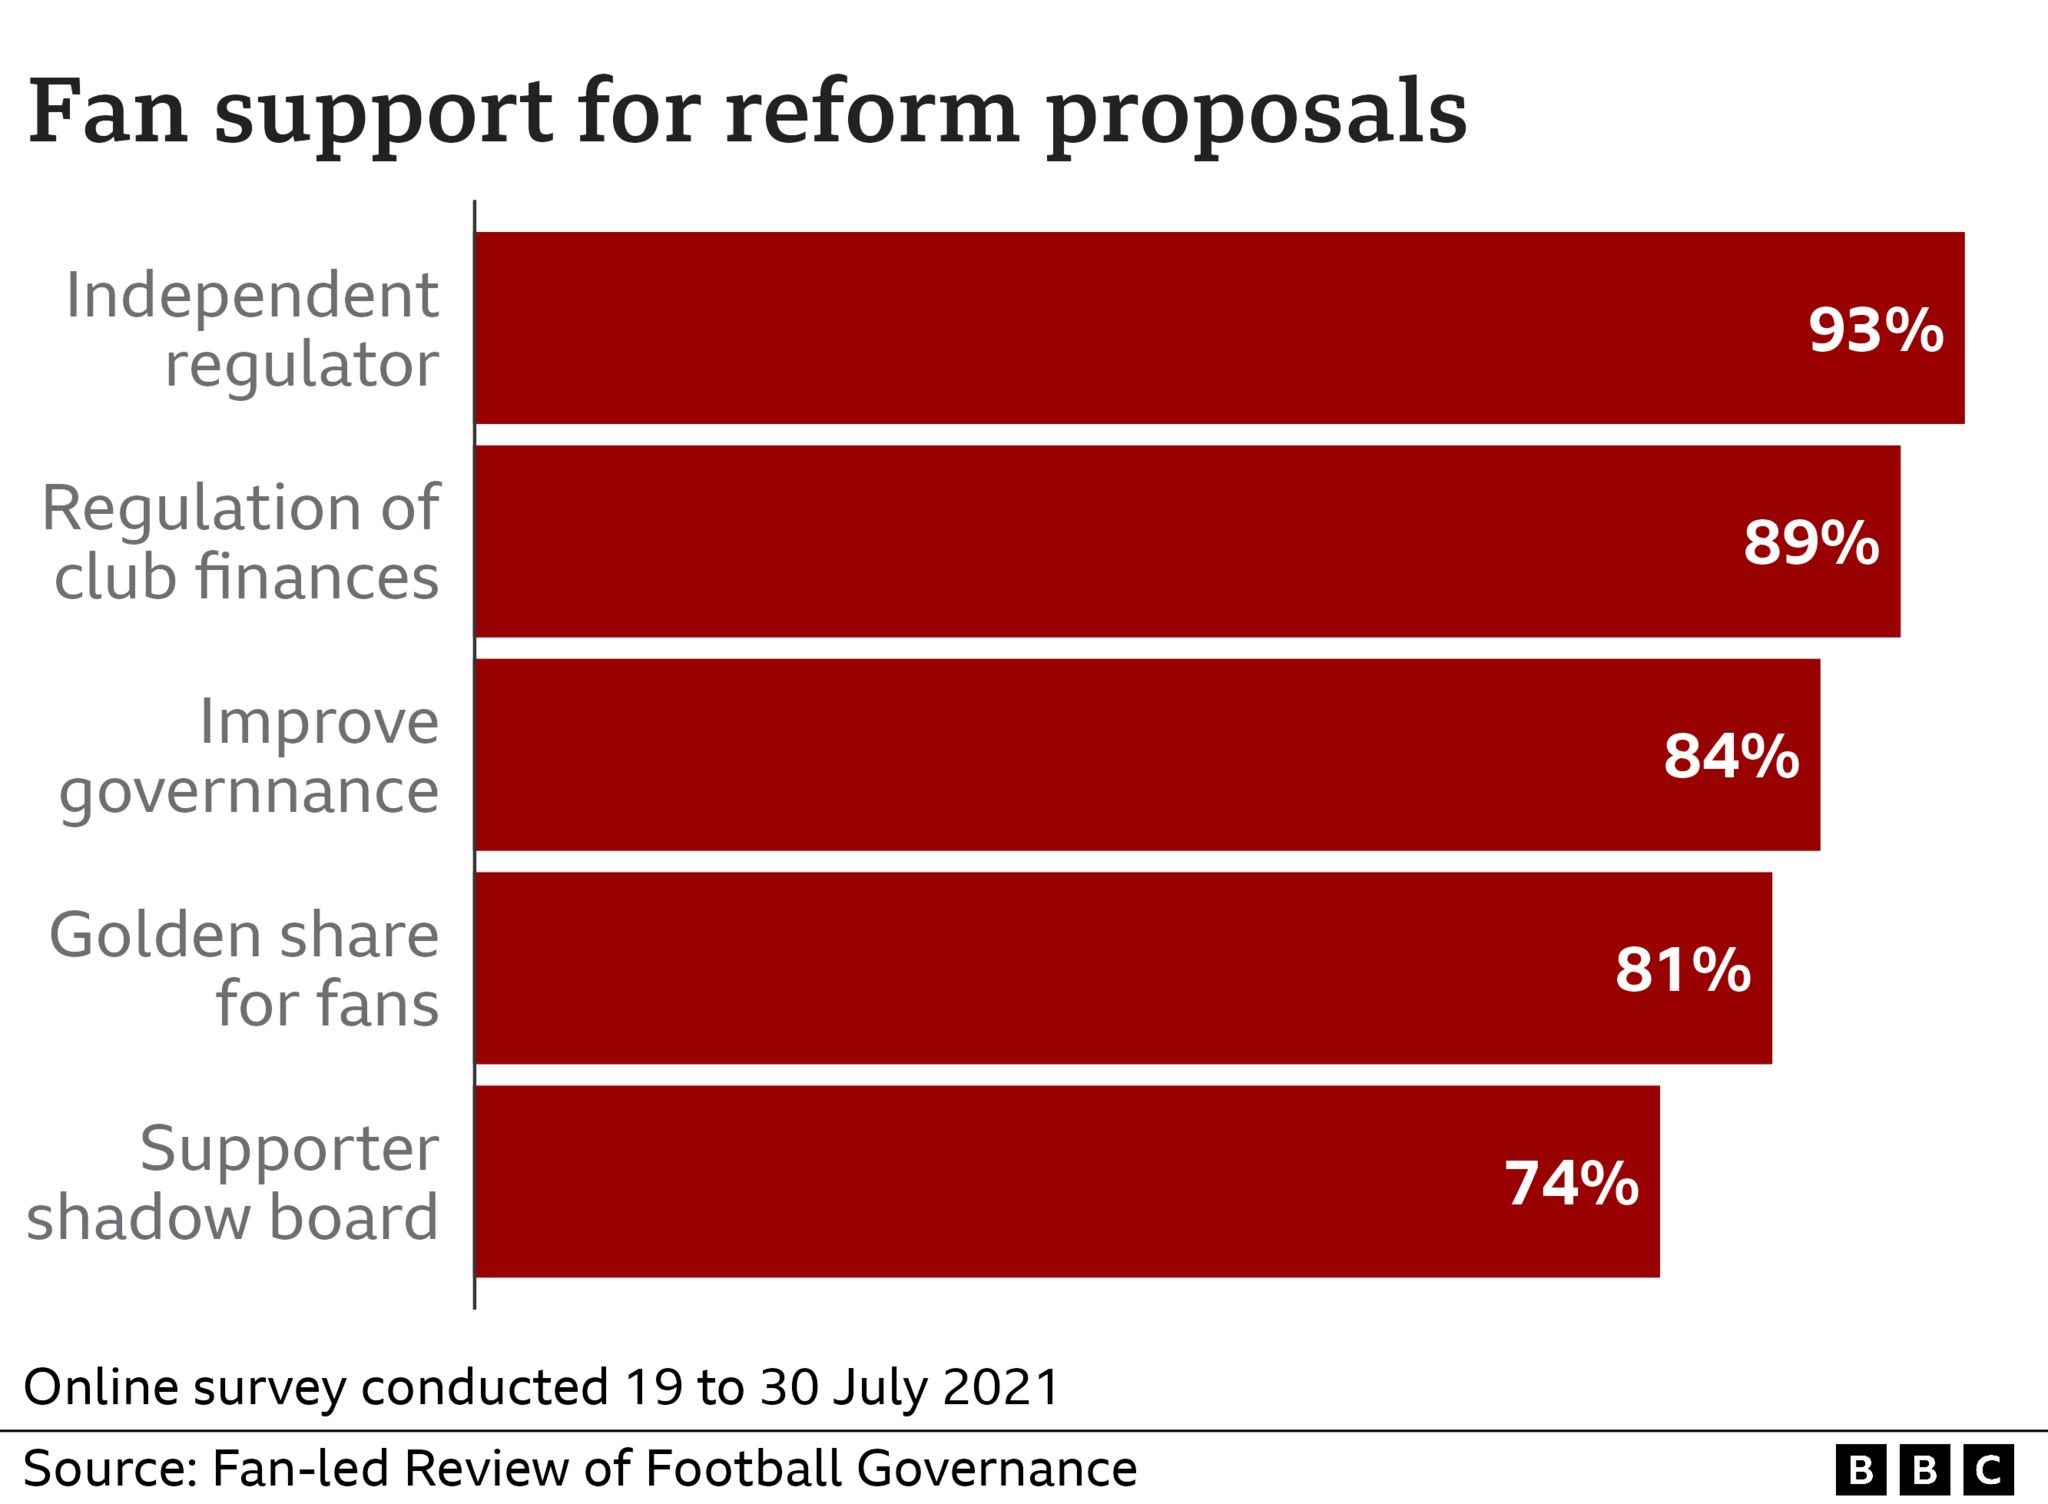 A graphic showing fan support for football reforms